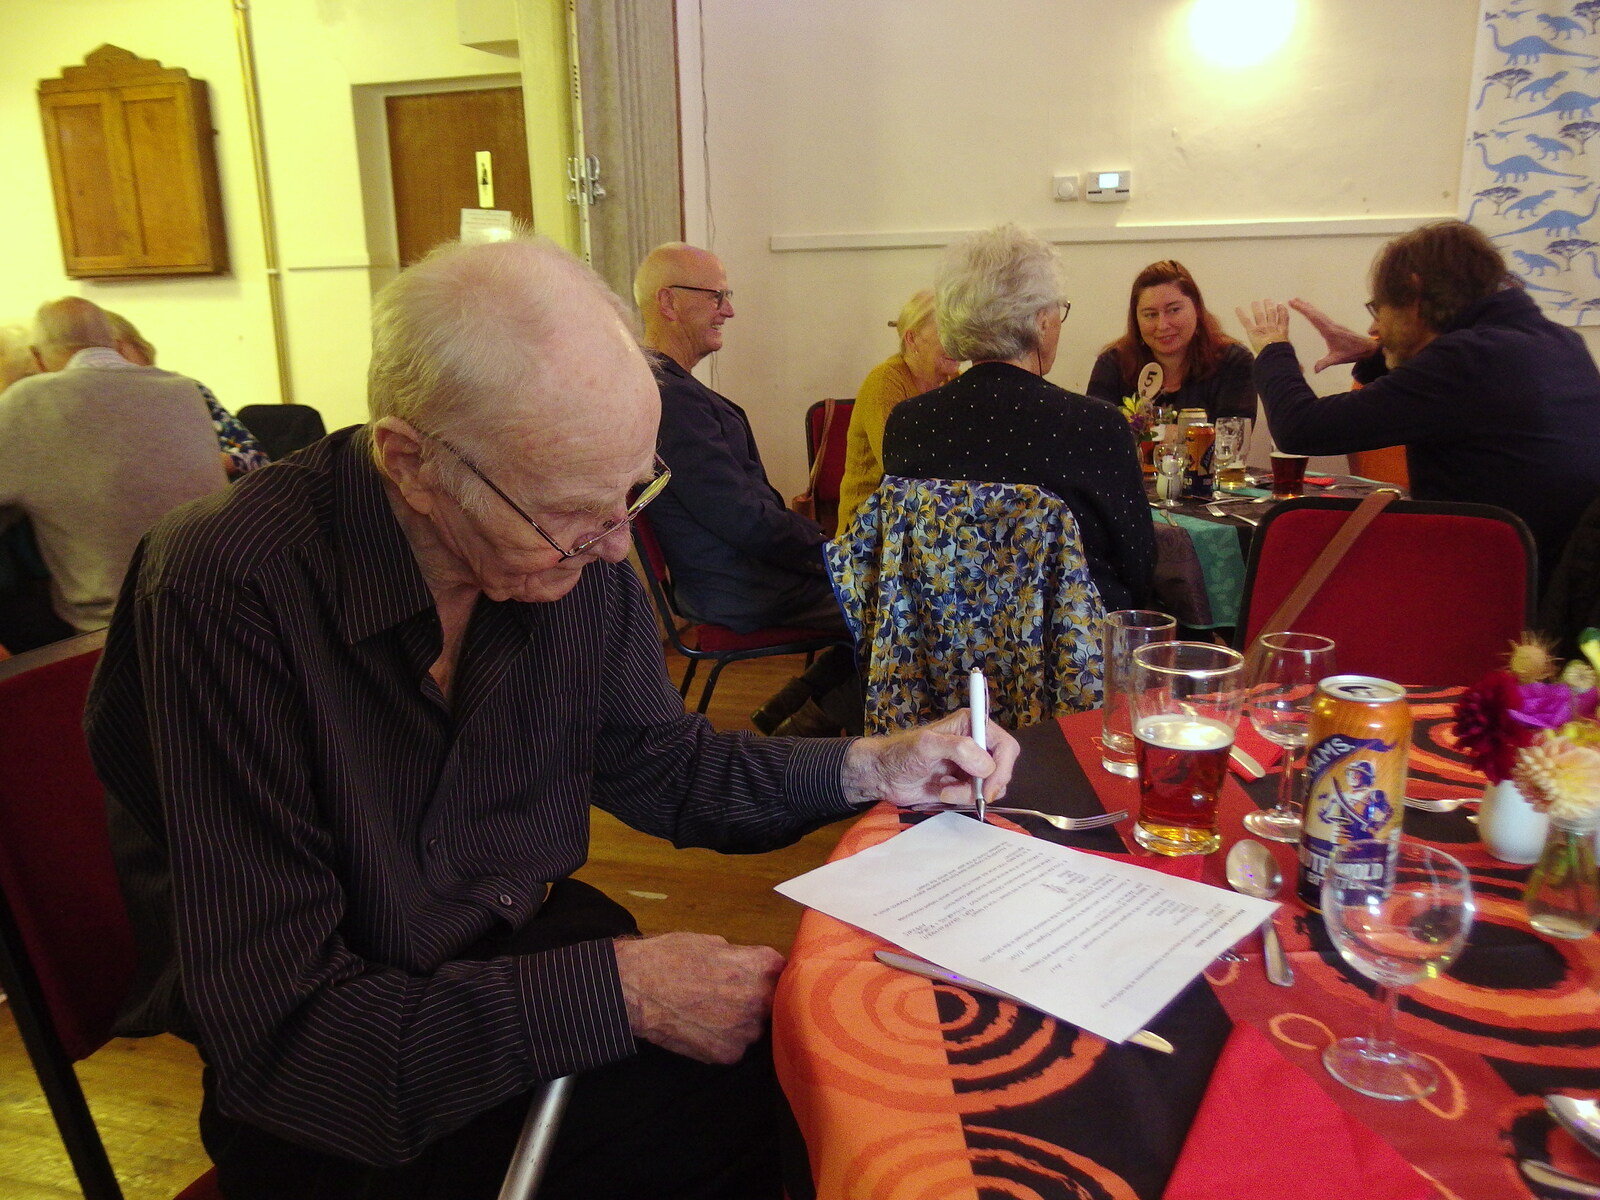 Grandad fills in a quiz from Sunday Lunch at the Village Hall, Brome, Suffolk - 10th October 2021